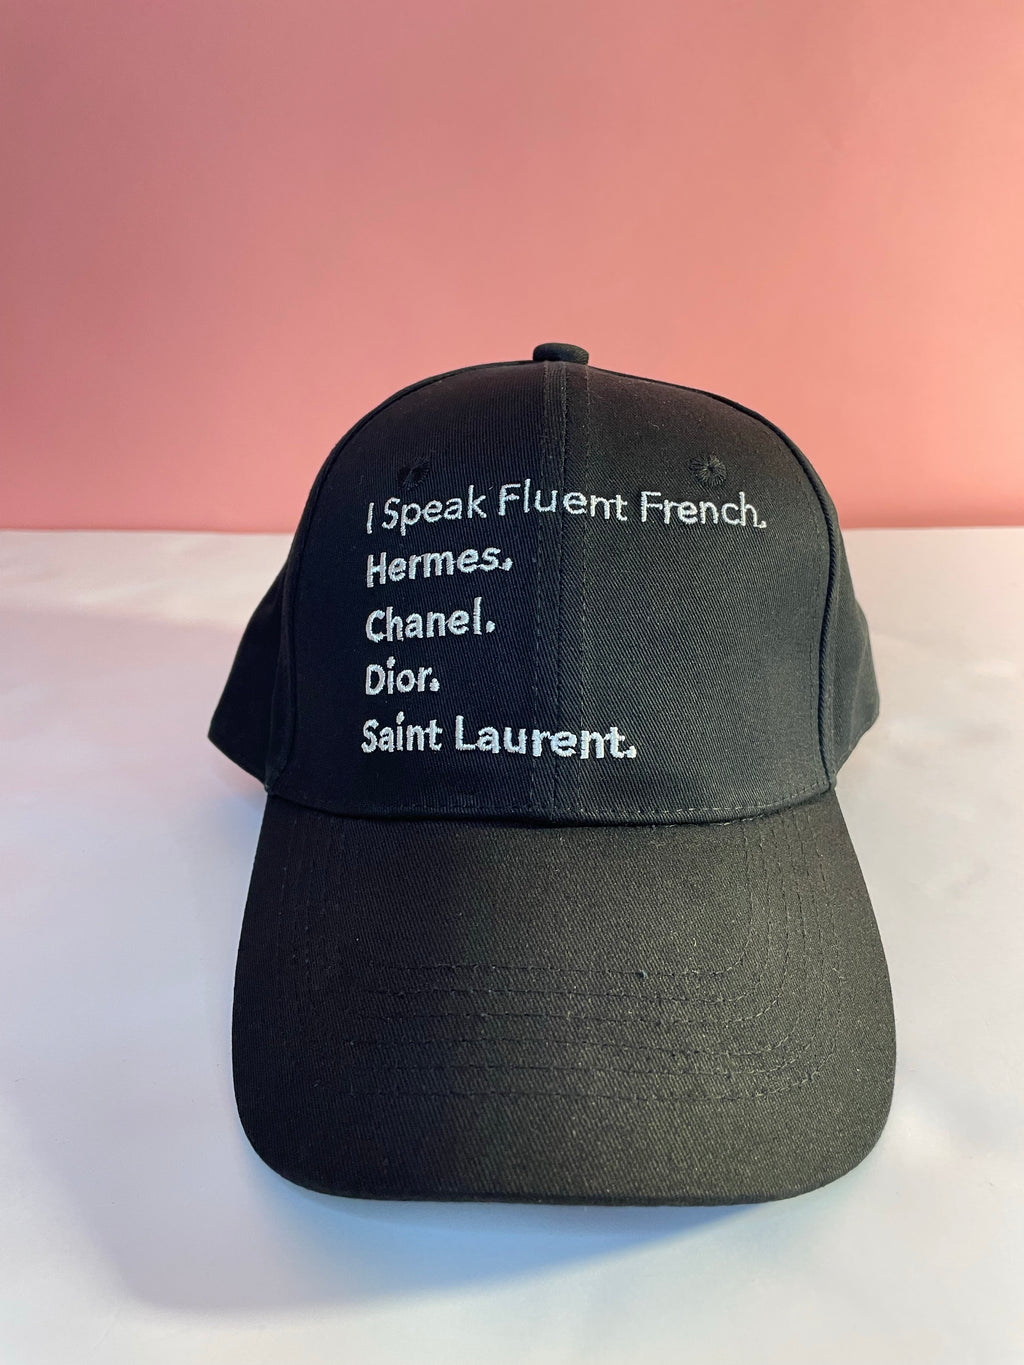 No matter if you washed your hair or not, this on trend I Speak Fluent French hats will help save the day. Our hats are sporty, chic, trendy and perfect for adding more detail to your look. Hats are essential part of your wardrobe and what better hat than this! Pair it with a bowie, Mimi, hoodie or crew neck to complete the look! Color: Black/ white lettering   Product Details: - 100% Cotton - Curved Brim - Hand Wash - Adjustable back strap